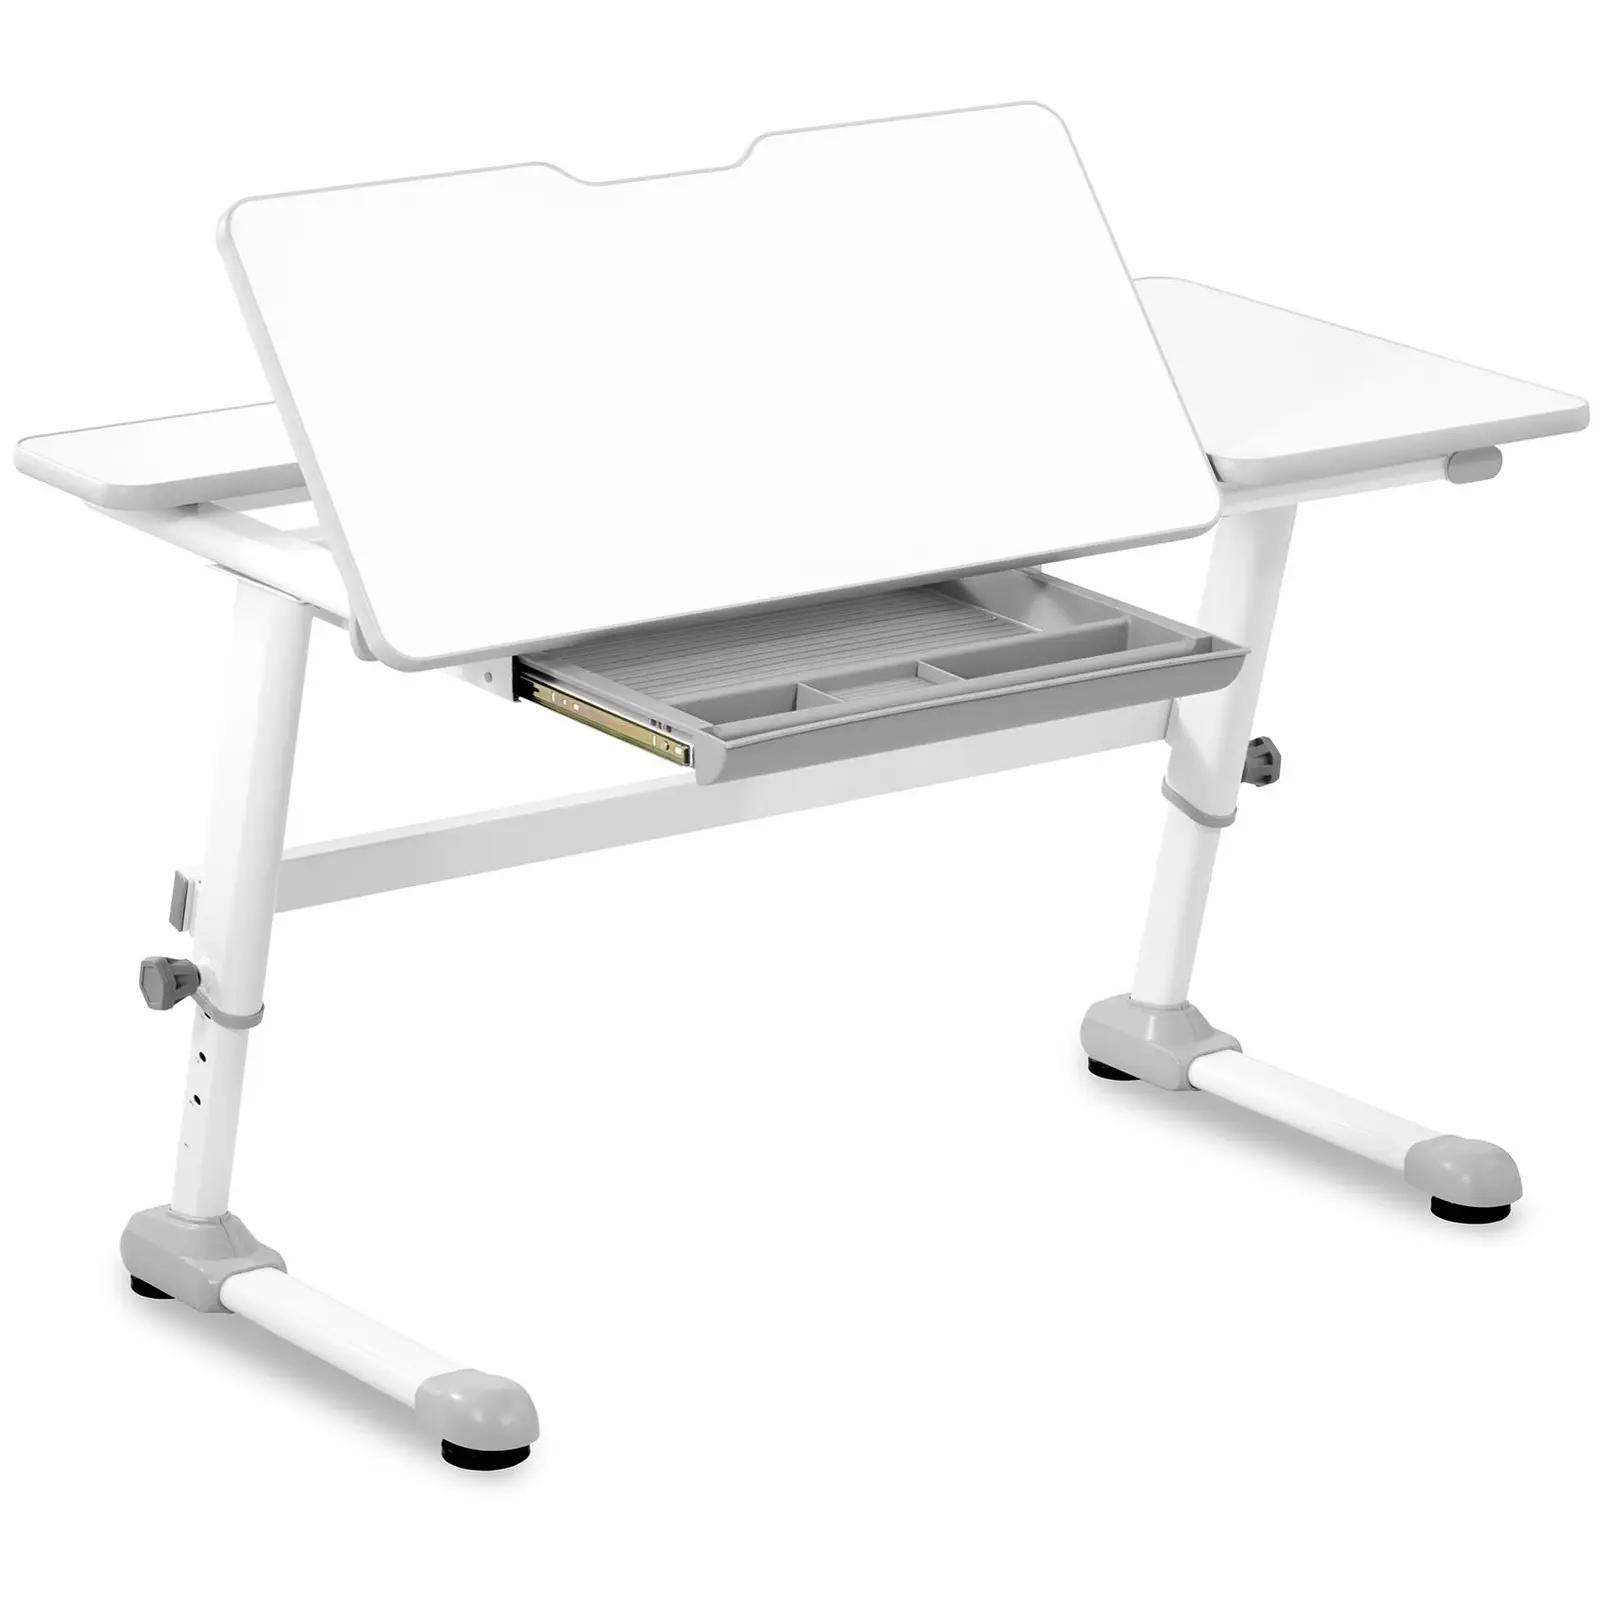 Childrens height adjustable desk  - 120 x 66 cm - 0 - 50° tiltable - height: 600 - 760 mm - with drawer